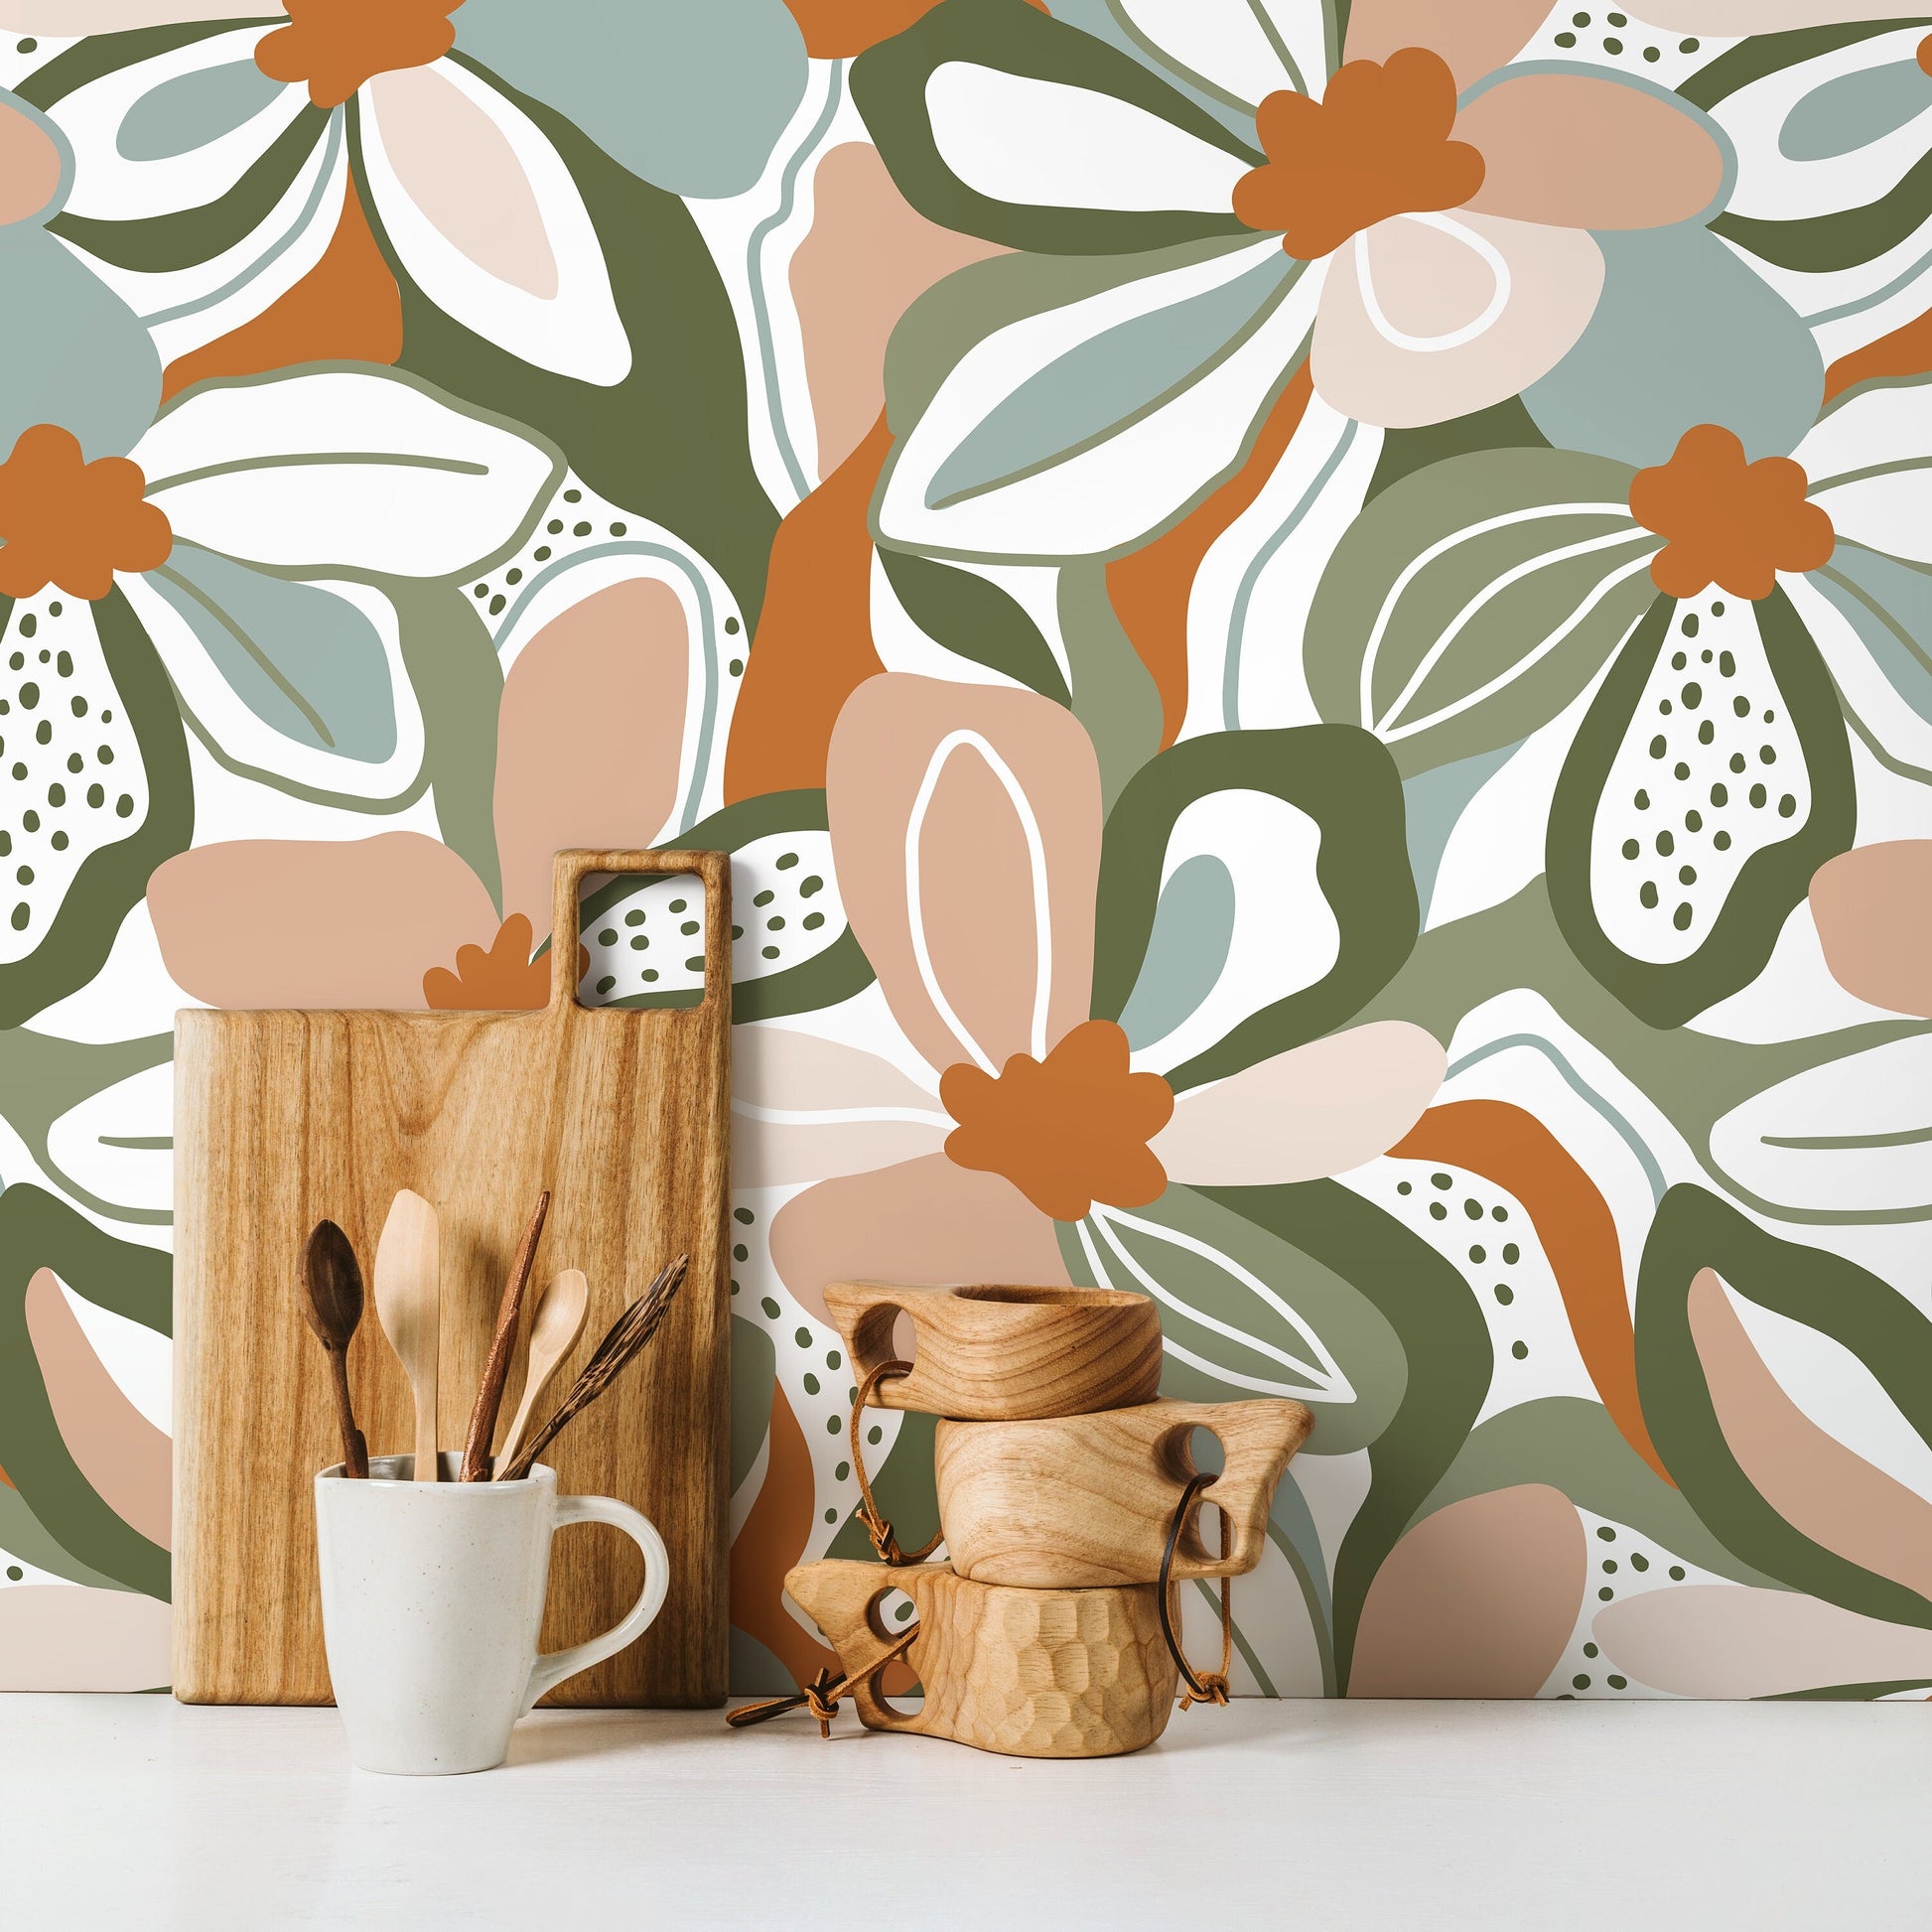 Colorful Floral Wallpaper Fun Wallpaper Peel and Stick and Traditional Wallpaper - D655